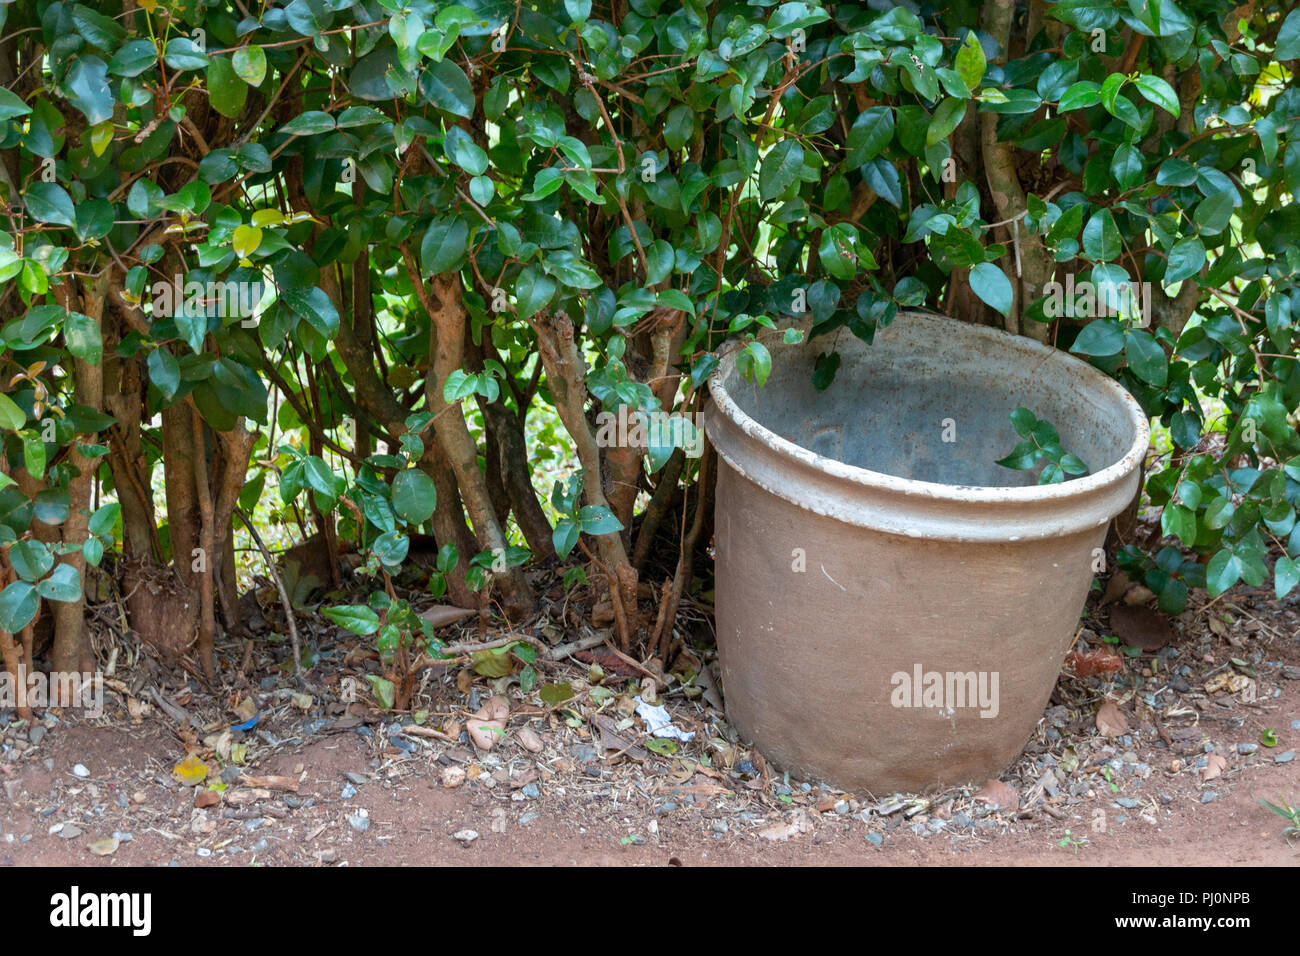 A large empty grey metal rusted pot next to a green hedge in a garden Stock Photo